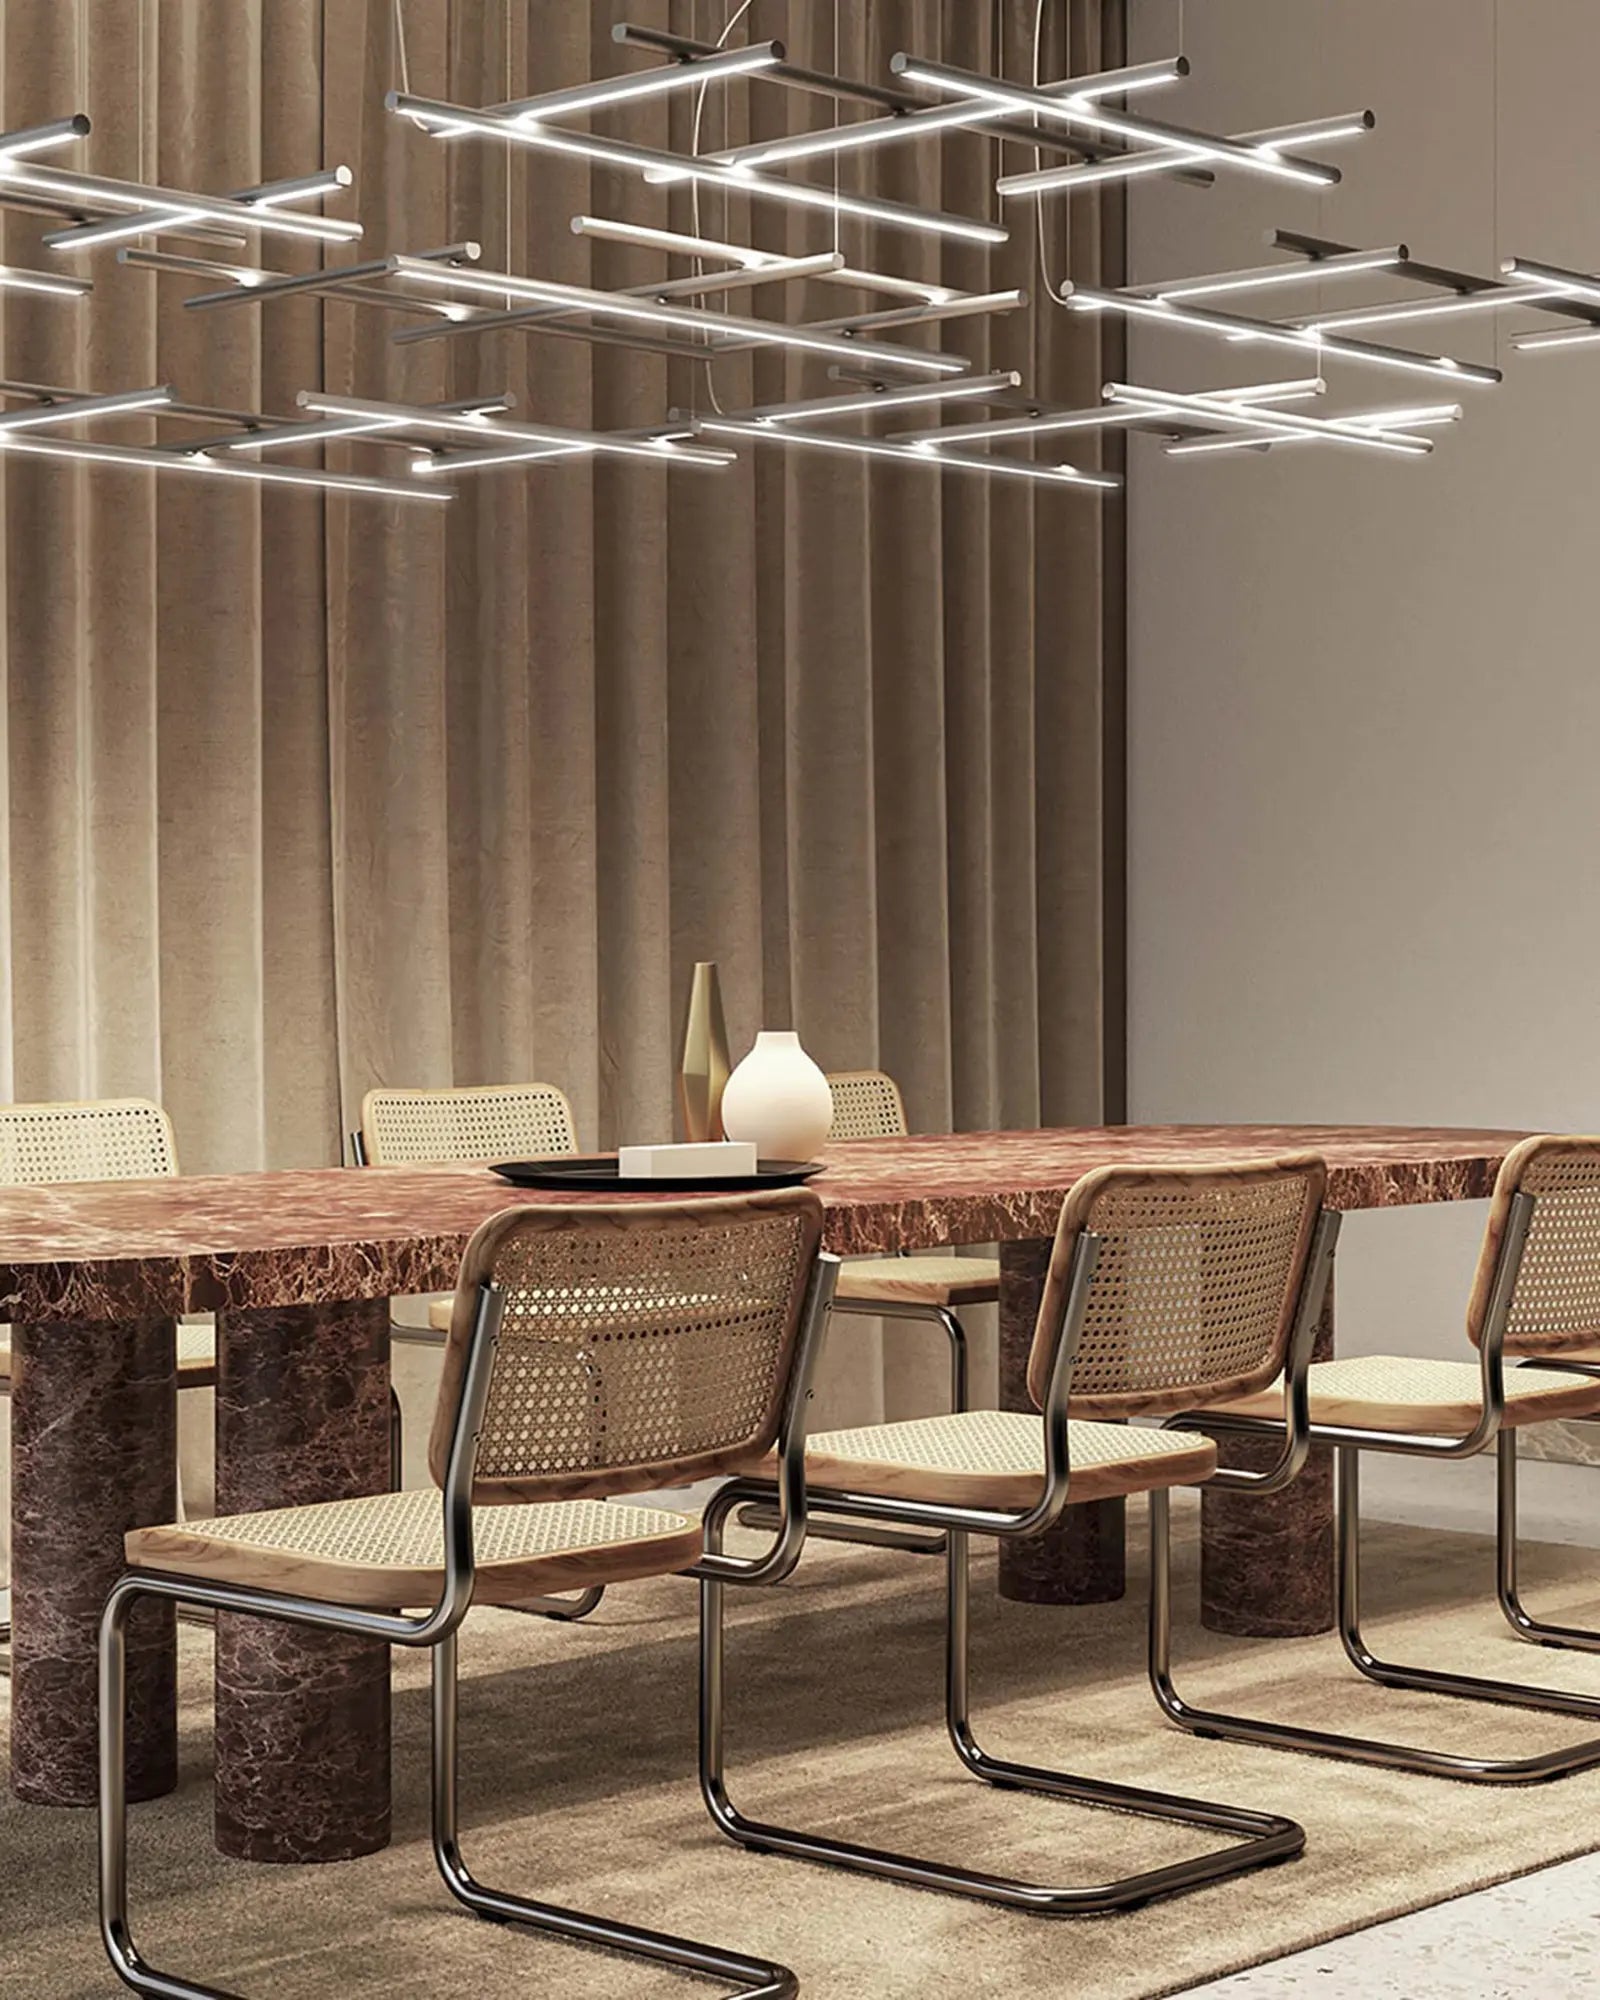 Hilow line pendant light cluster above a dining table